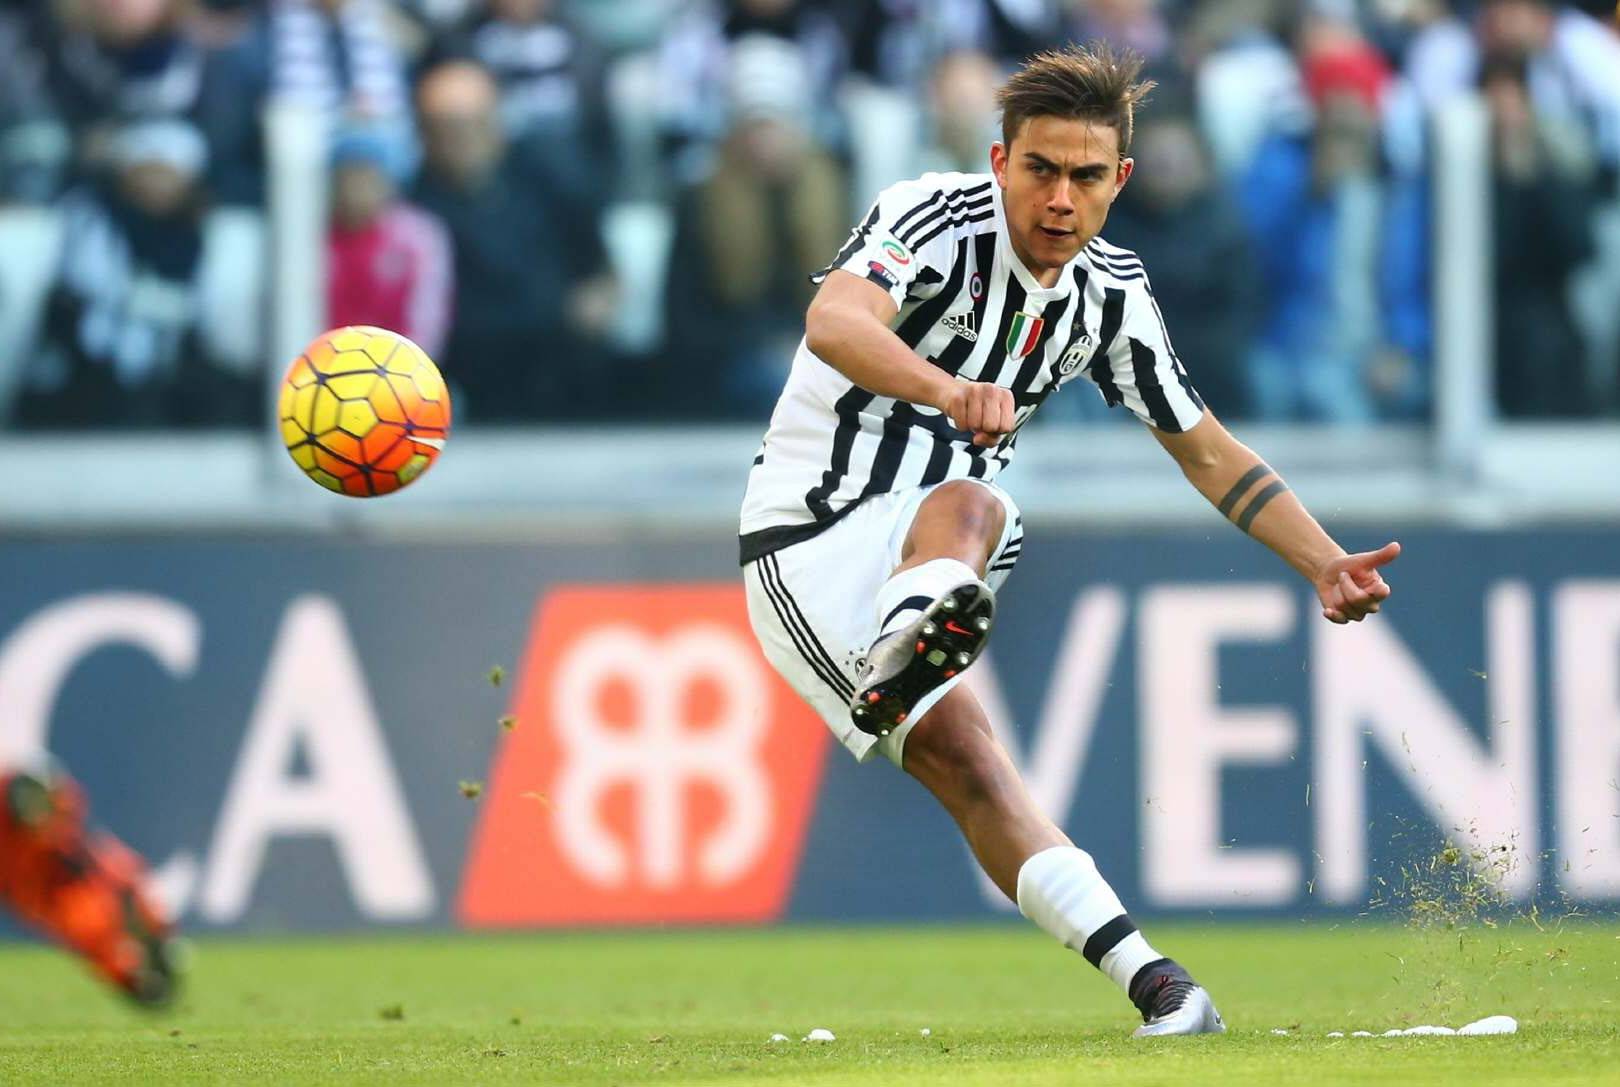 Paulo Dybala, marking a goal the past season with the Juventus